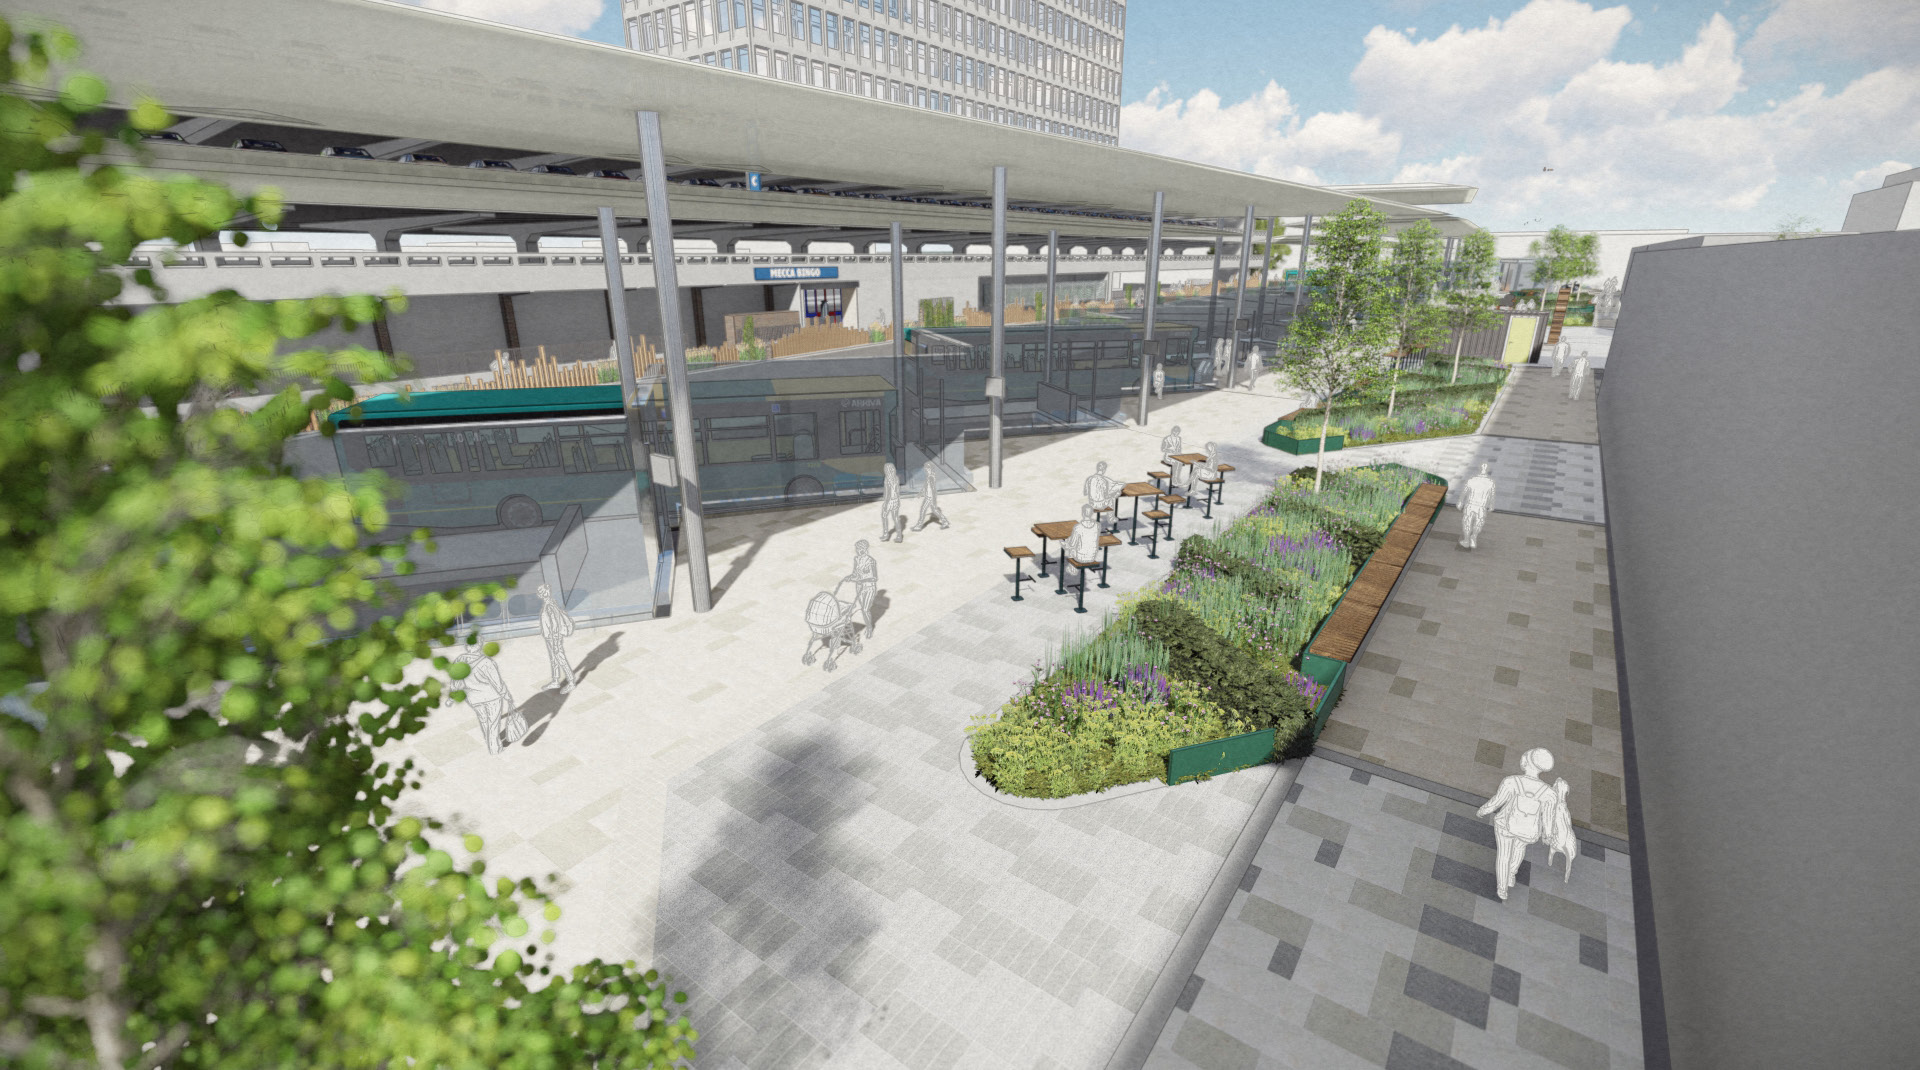 Proposed Harlow Bus-Station-Concourse featuring covered area and trees.